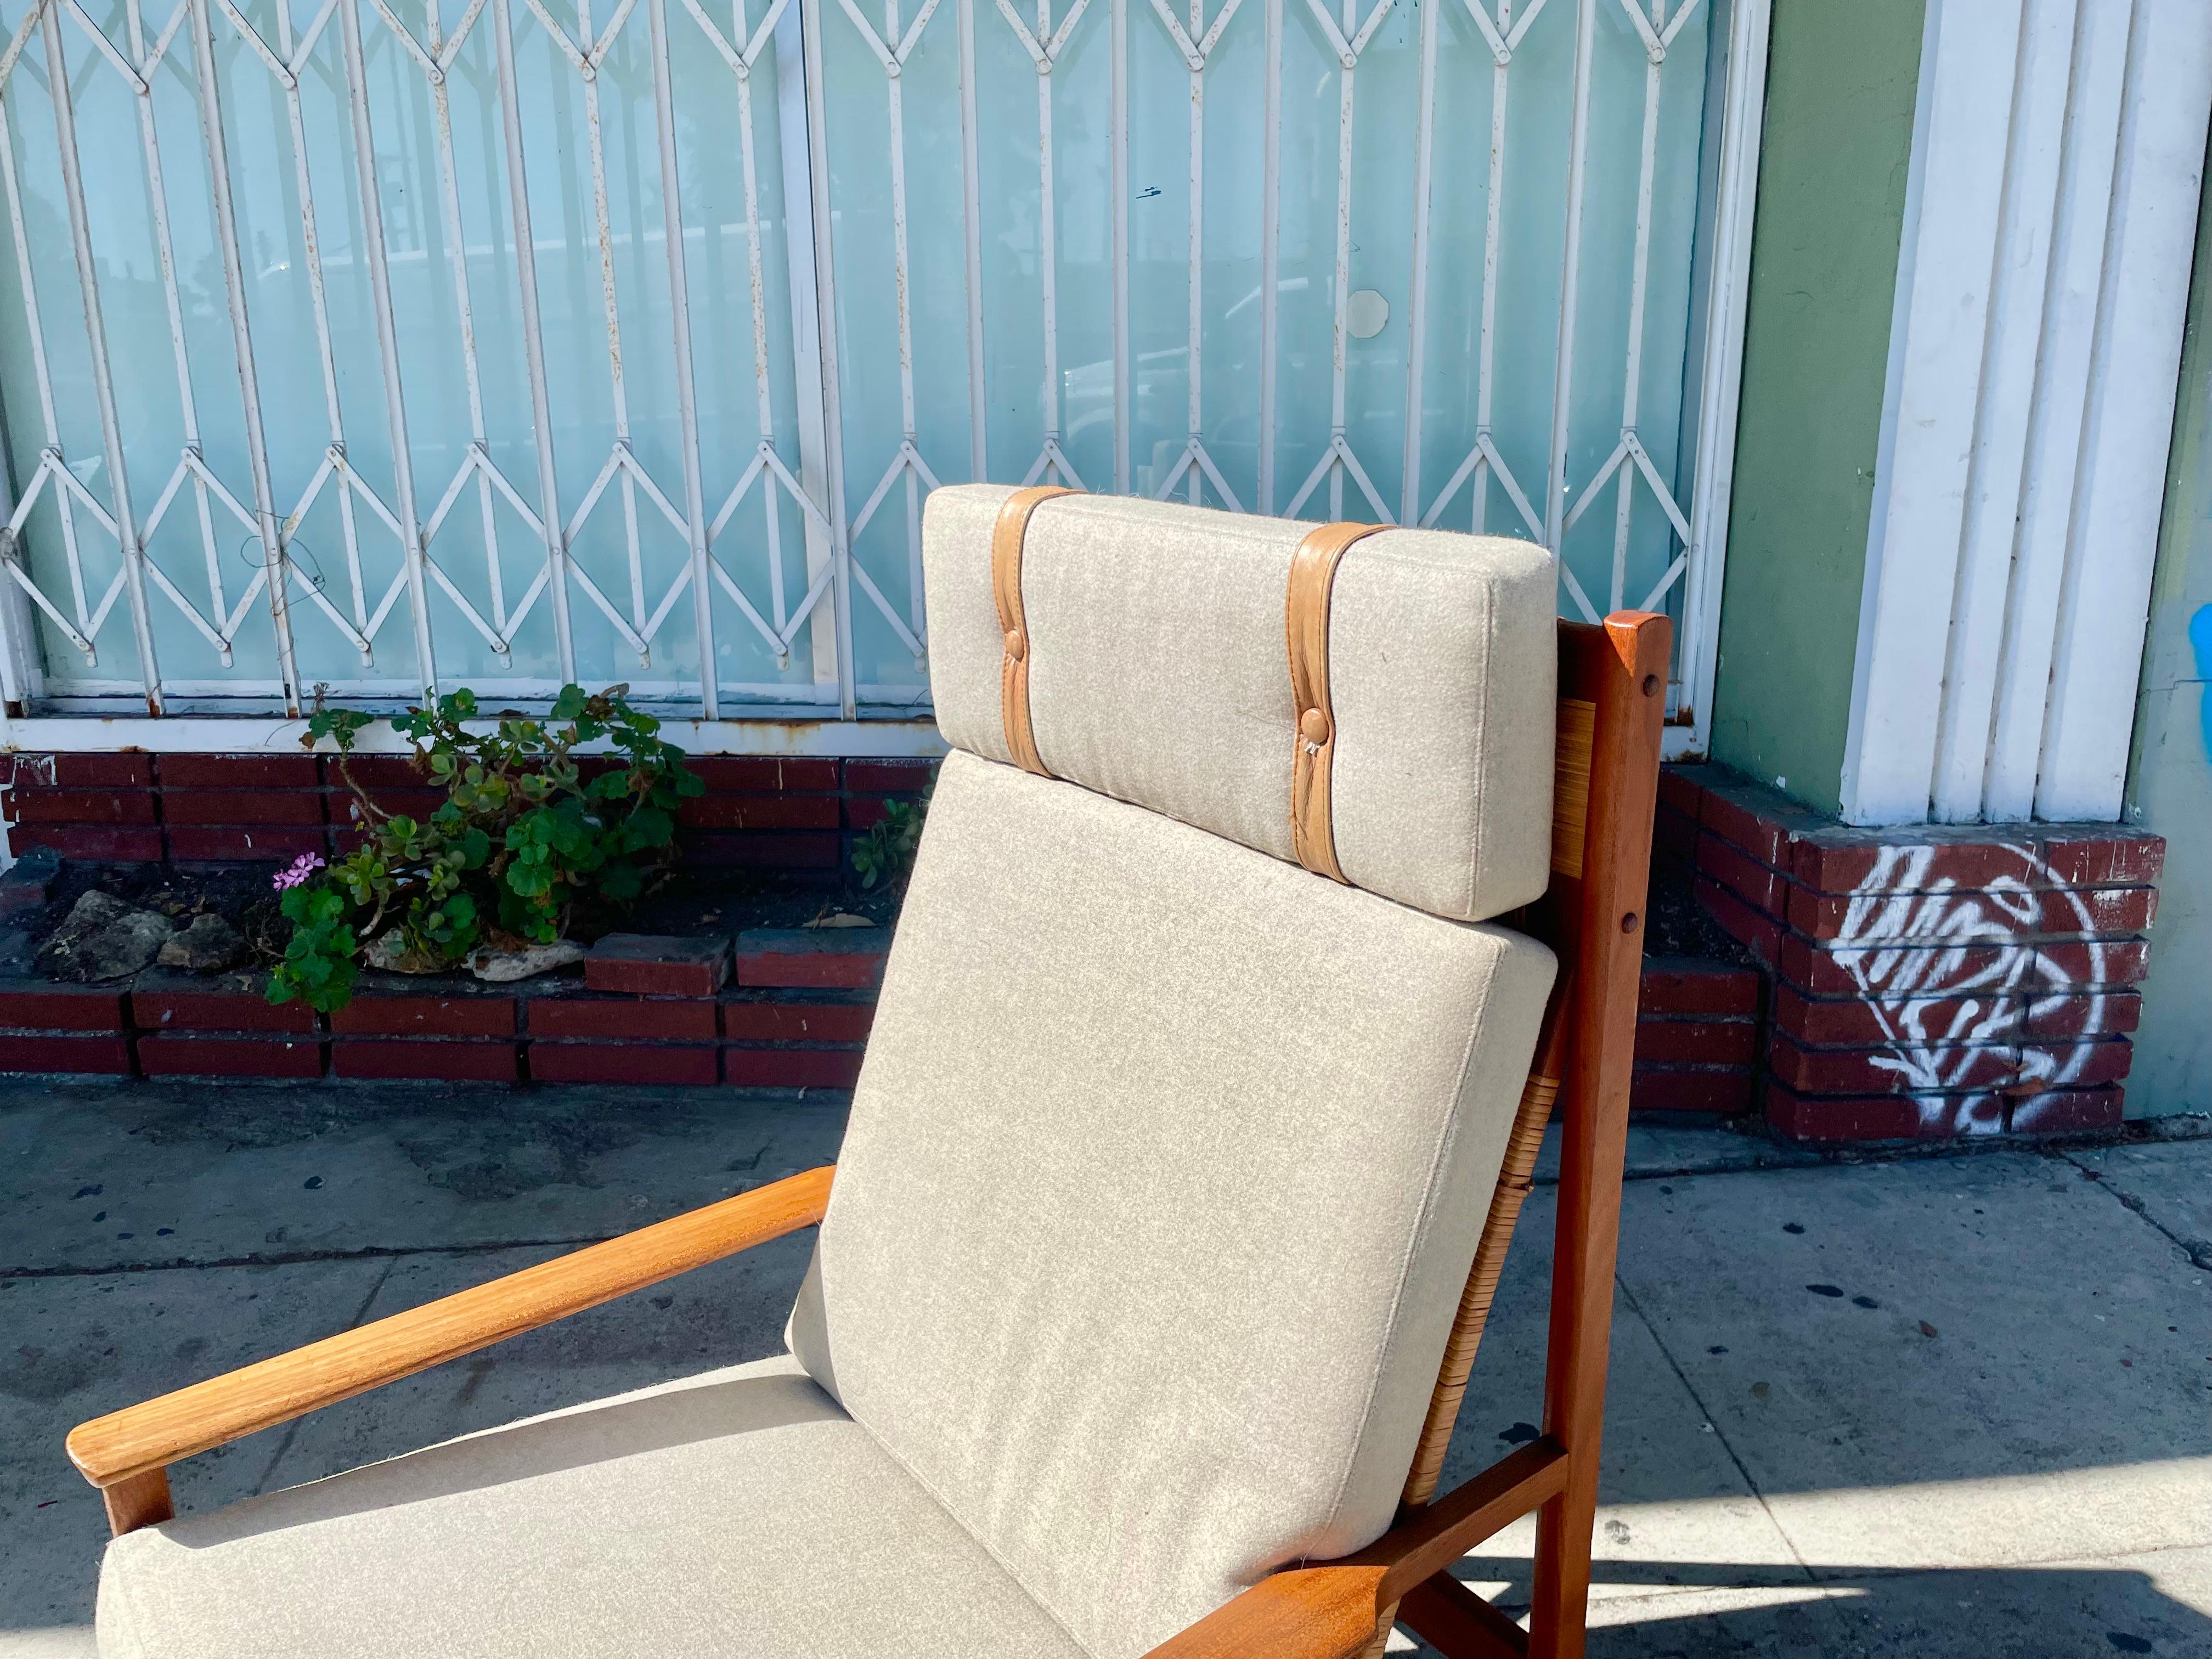 1960s Danish Modern Teak Lounge Chair by Hans Olsen for Juul Kristensen In Good Condition For Sale In North Hollywood, CA